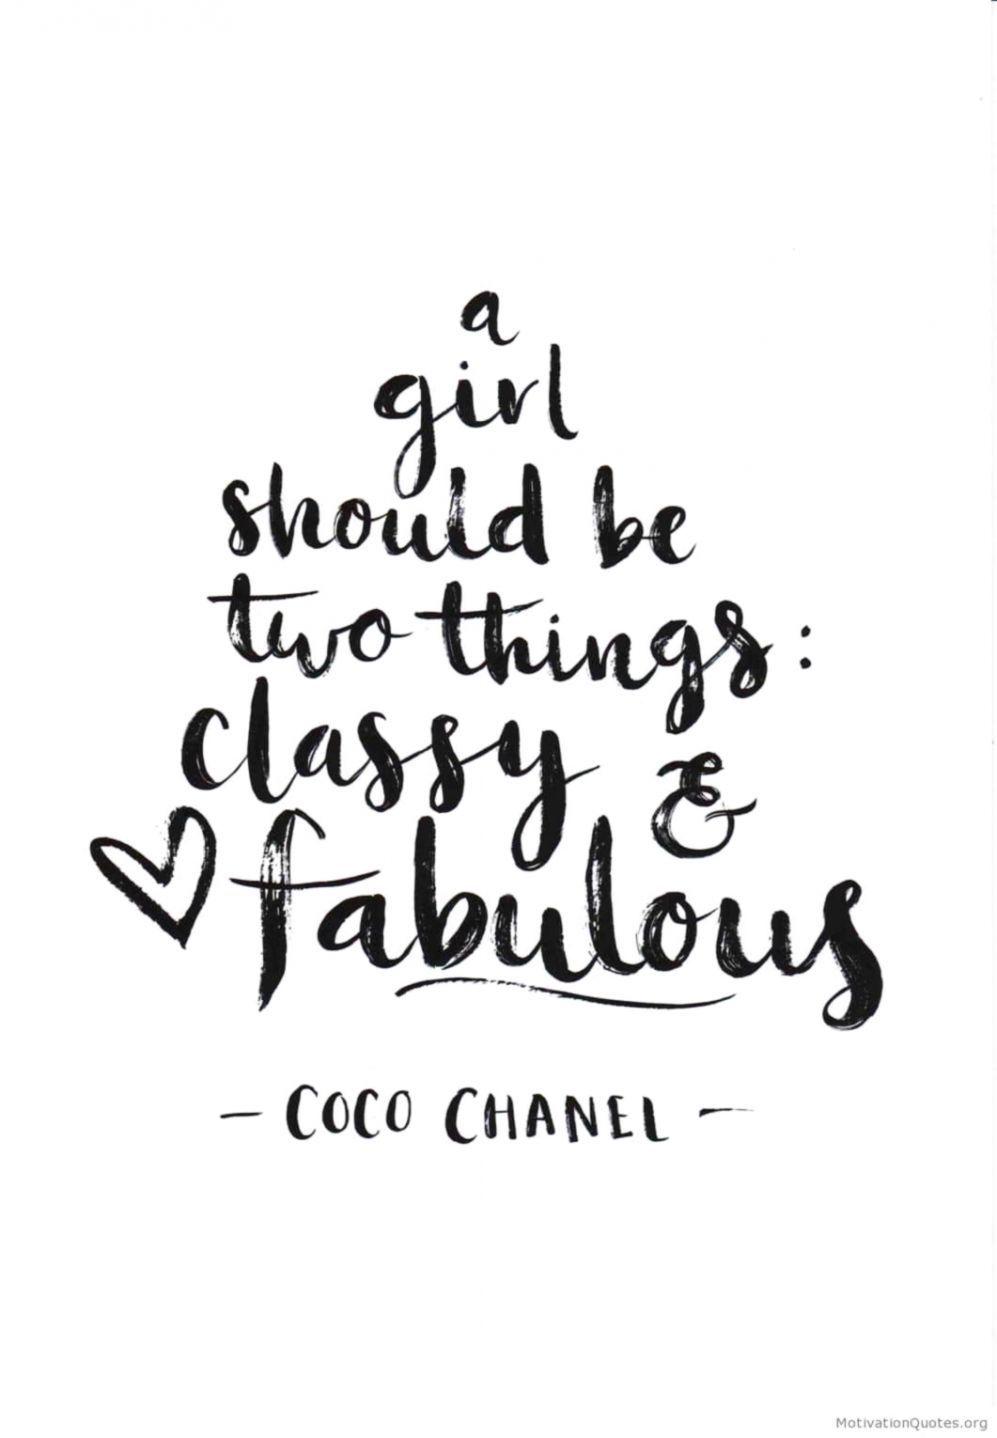 Coco Chanel Quotes Wallpapers Top Free Coco Chanel Quotes Backgrounds Wallpaperaccess